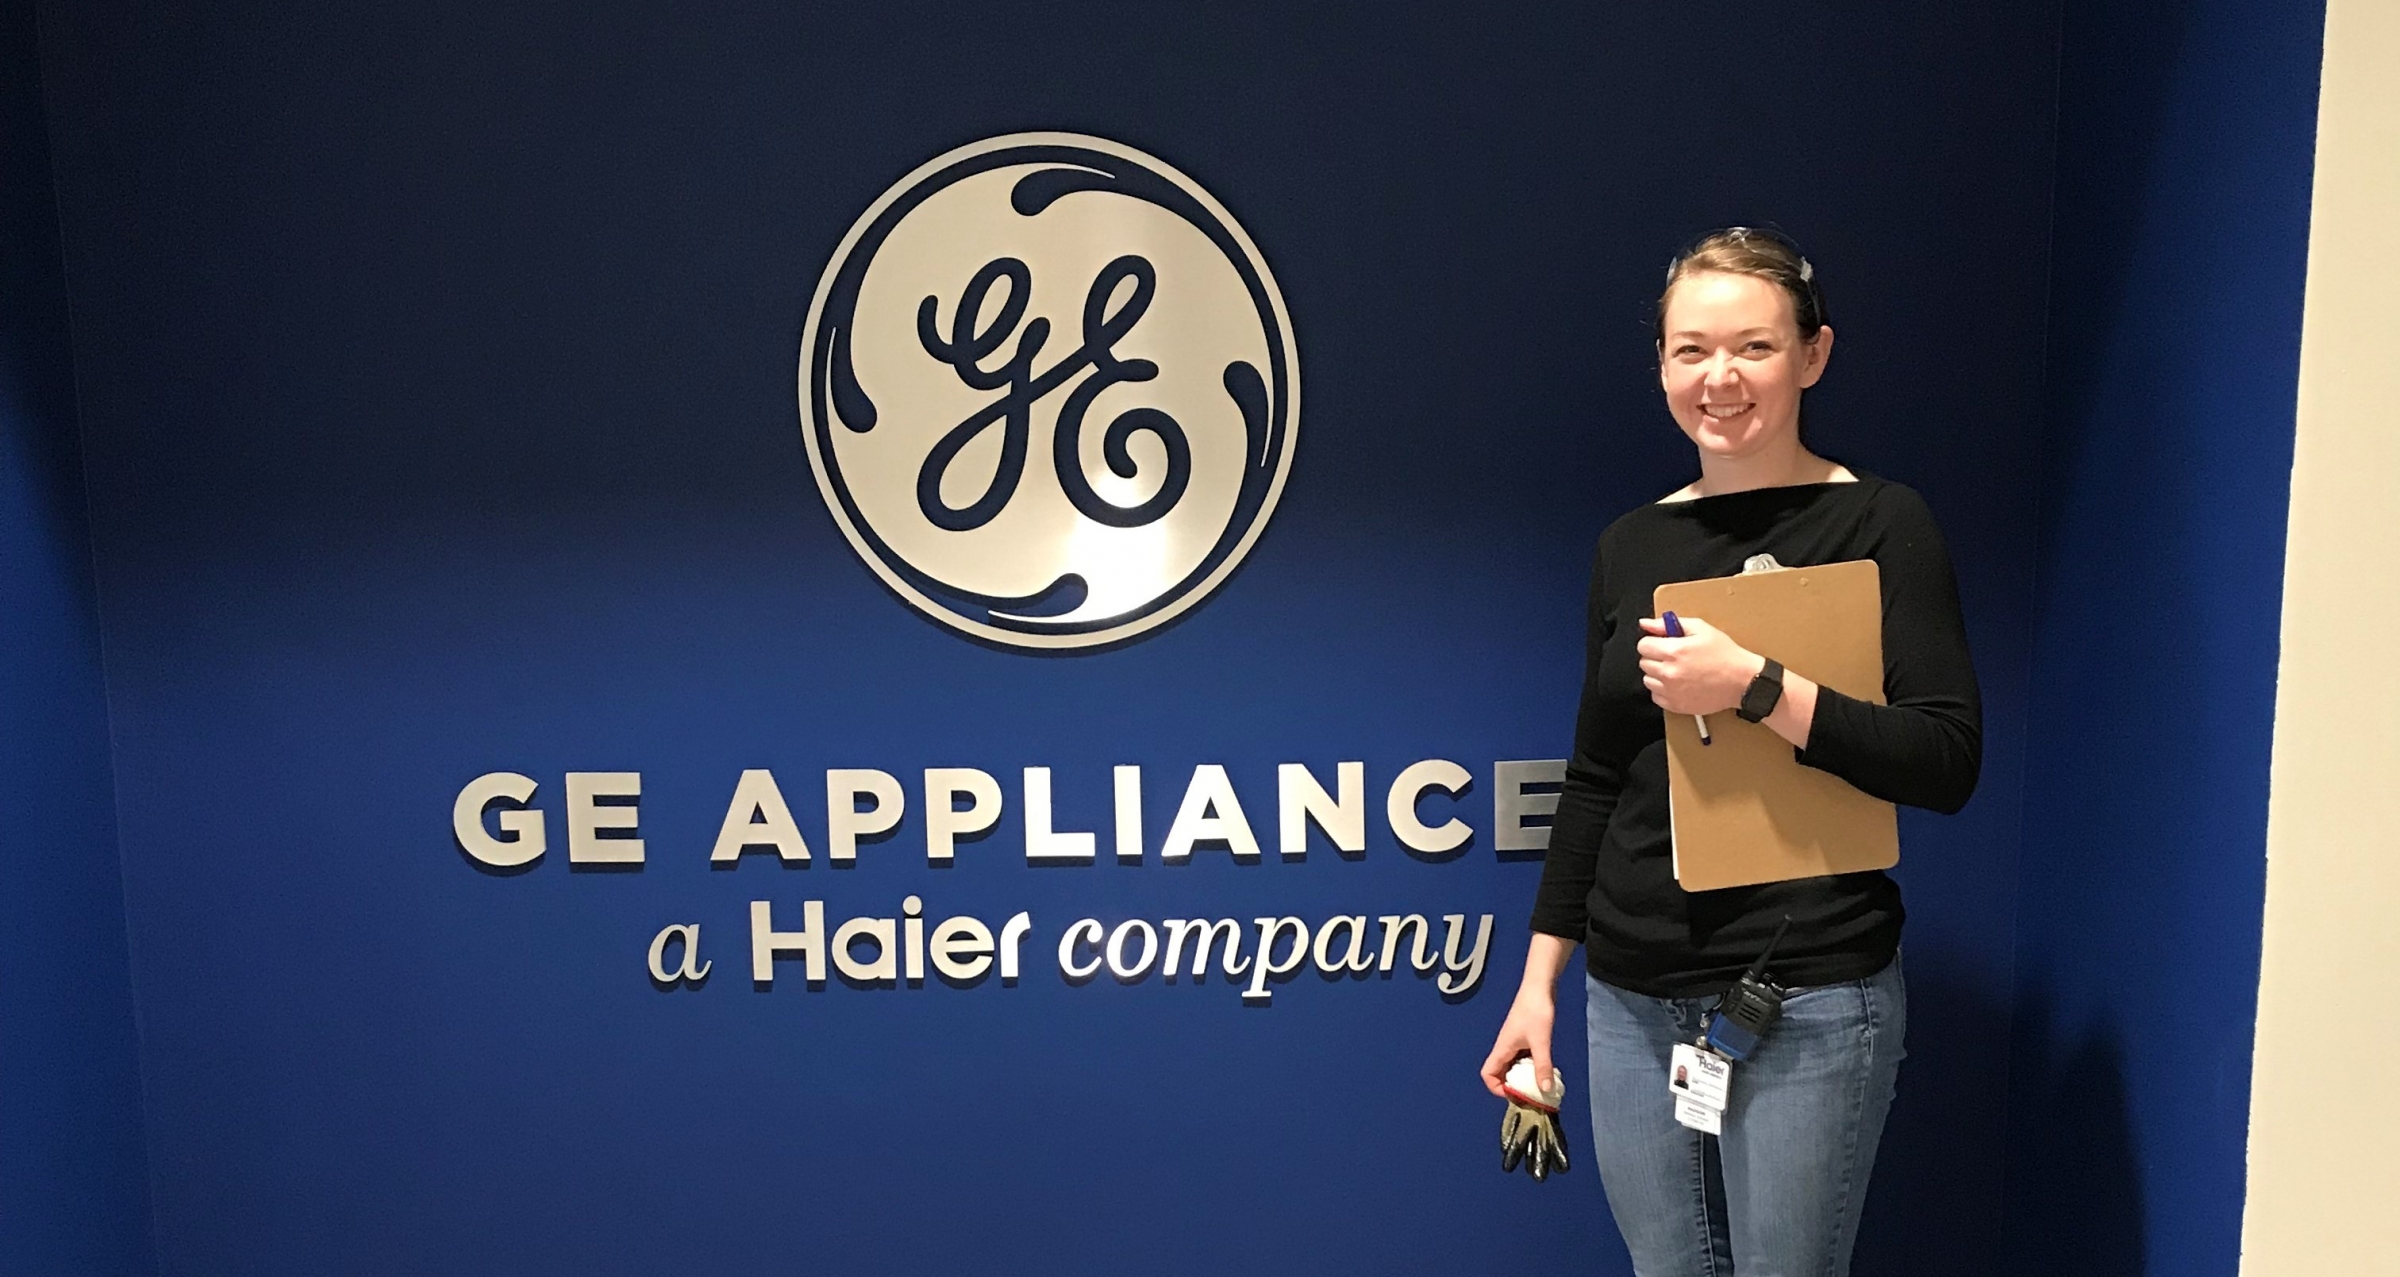 An image of an Eastern Kentucky University intern at the GE Appliance company.